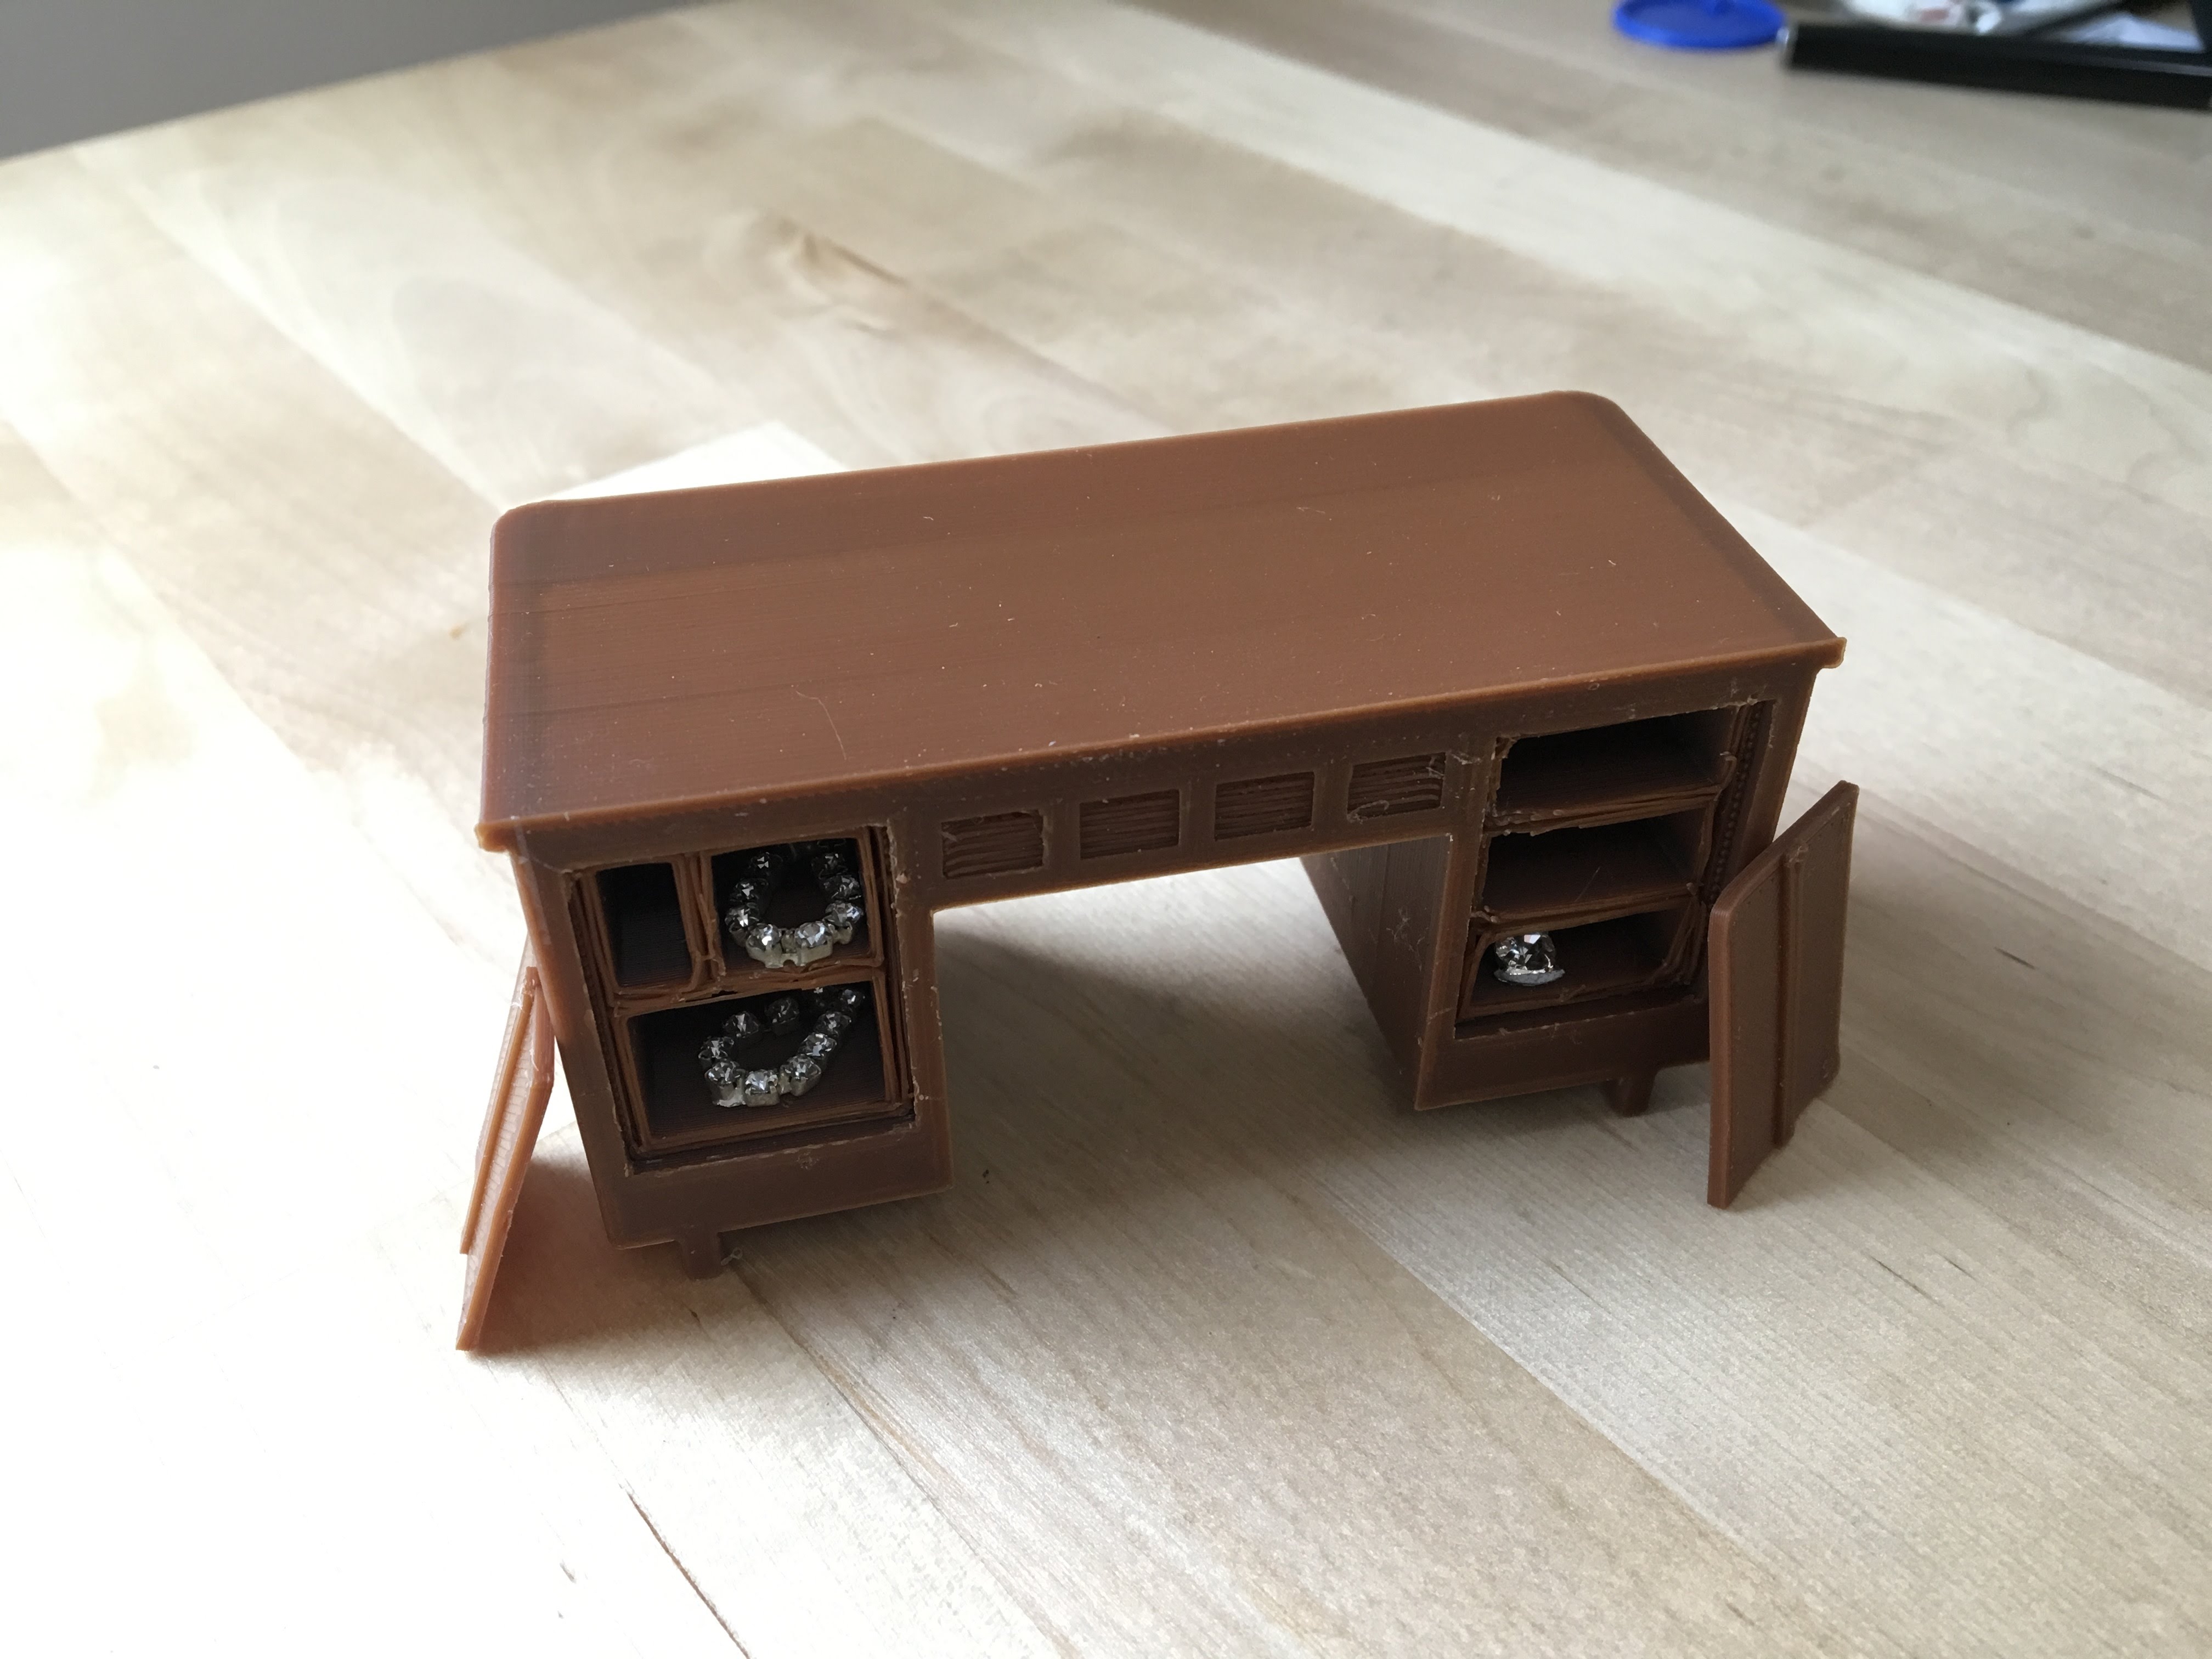 Desk with working drawers and secret compartments (1:18 scale)